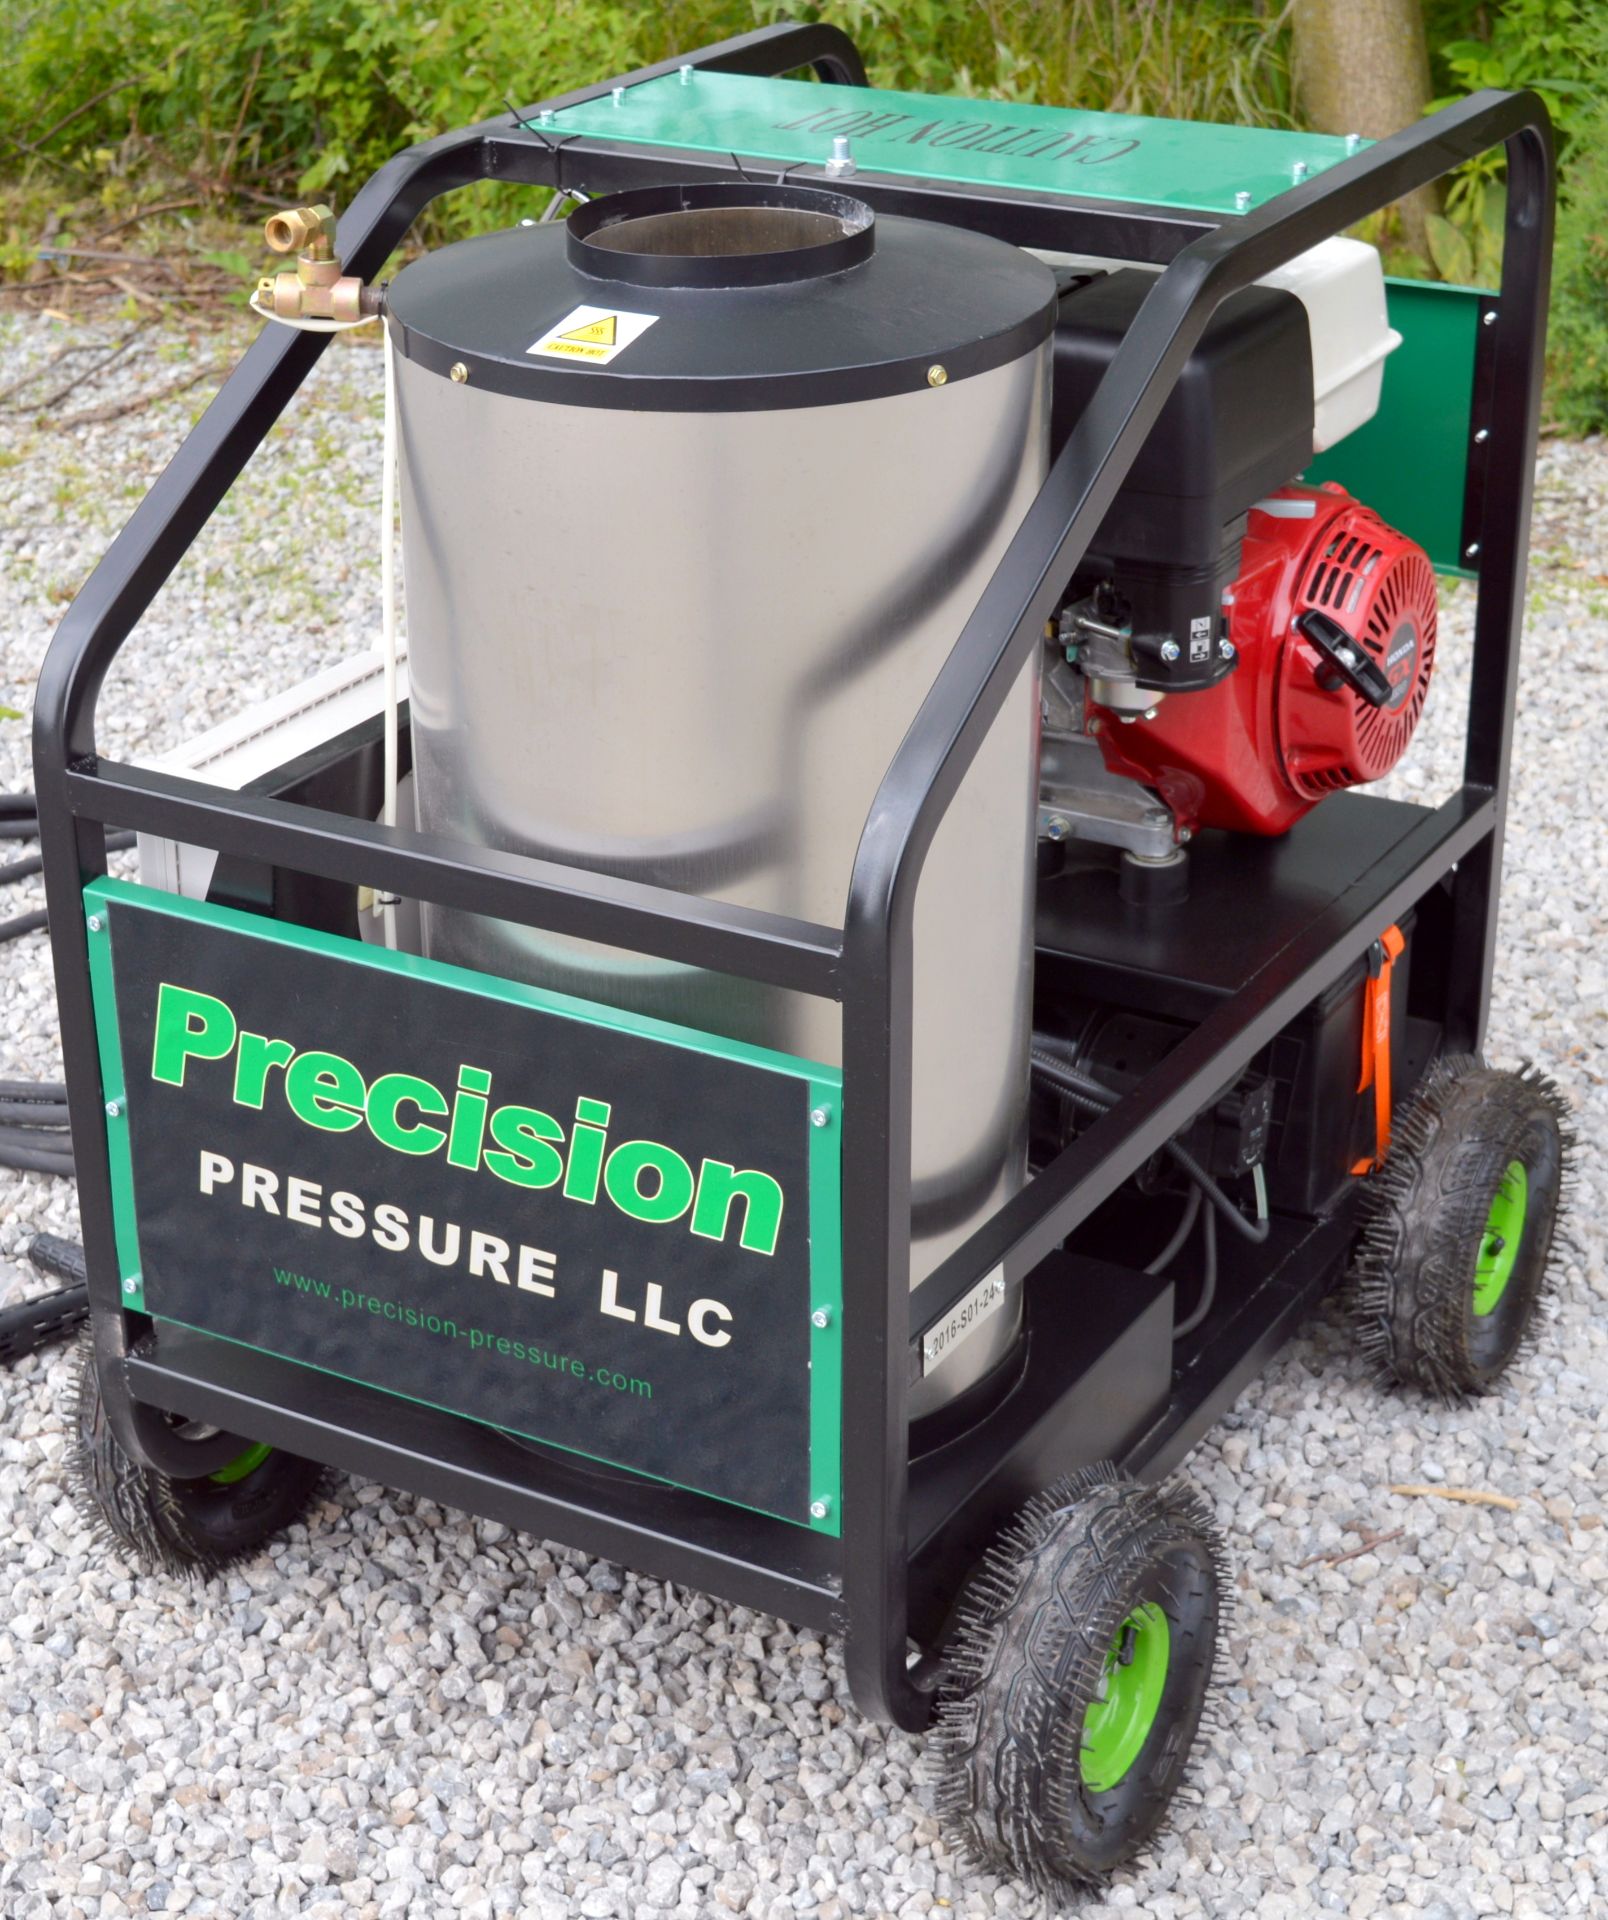 New Industrial Honda Hot Pressure Washer with Warranty